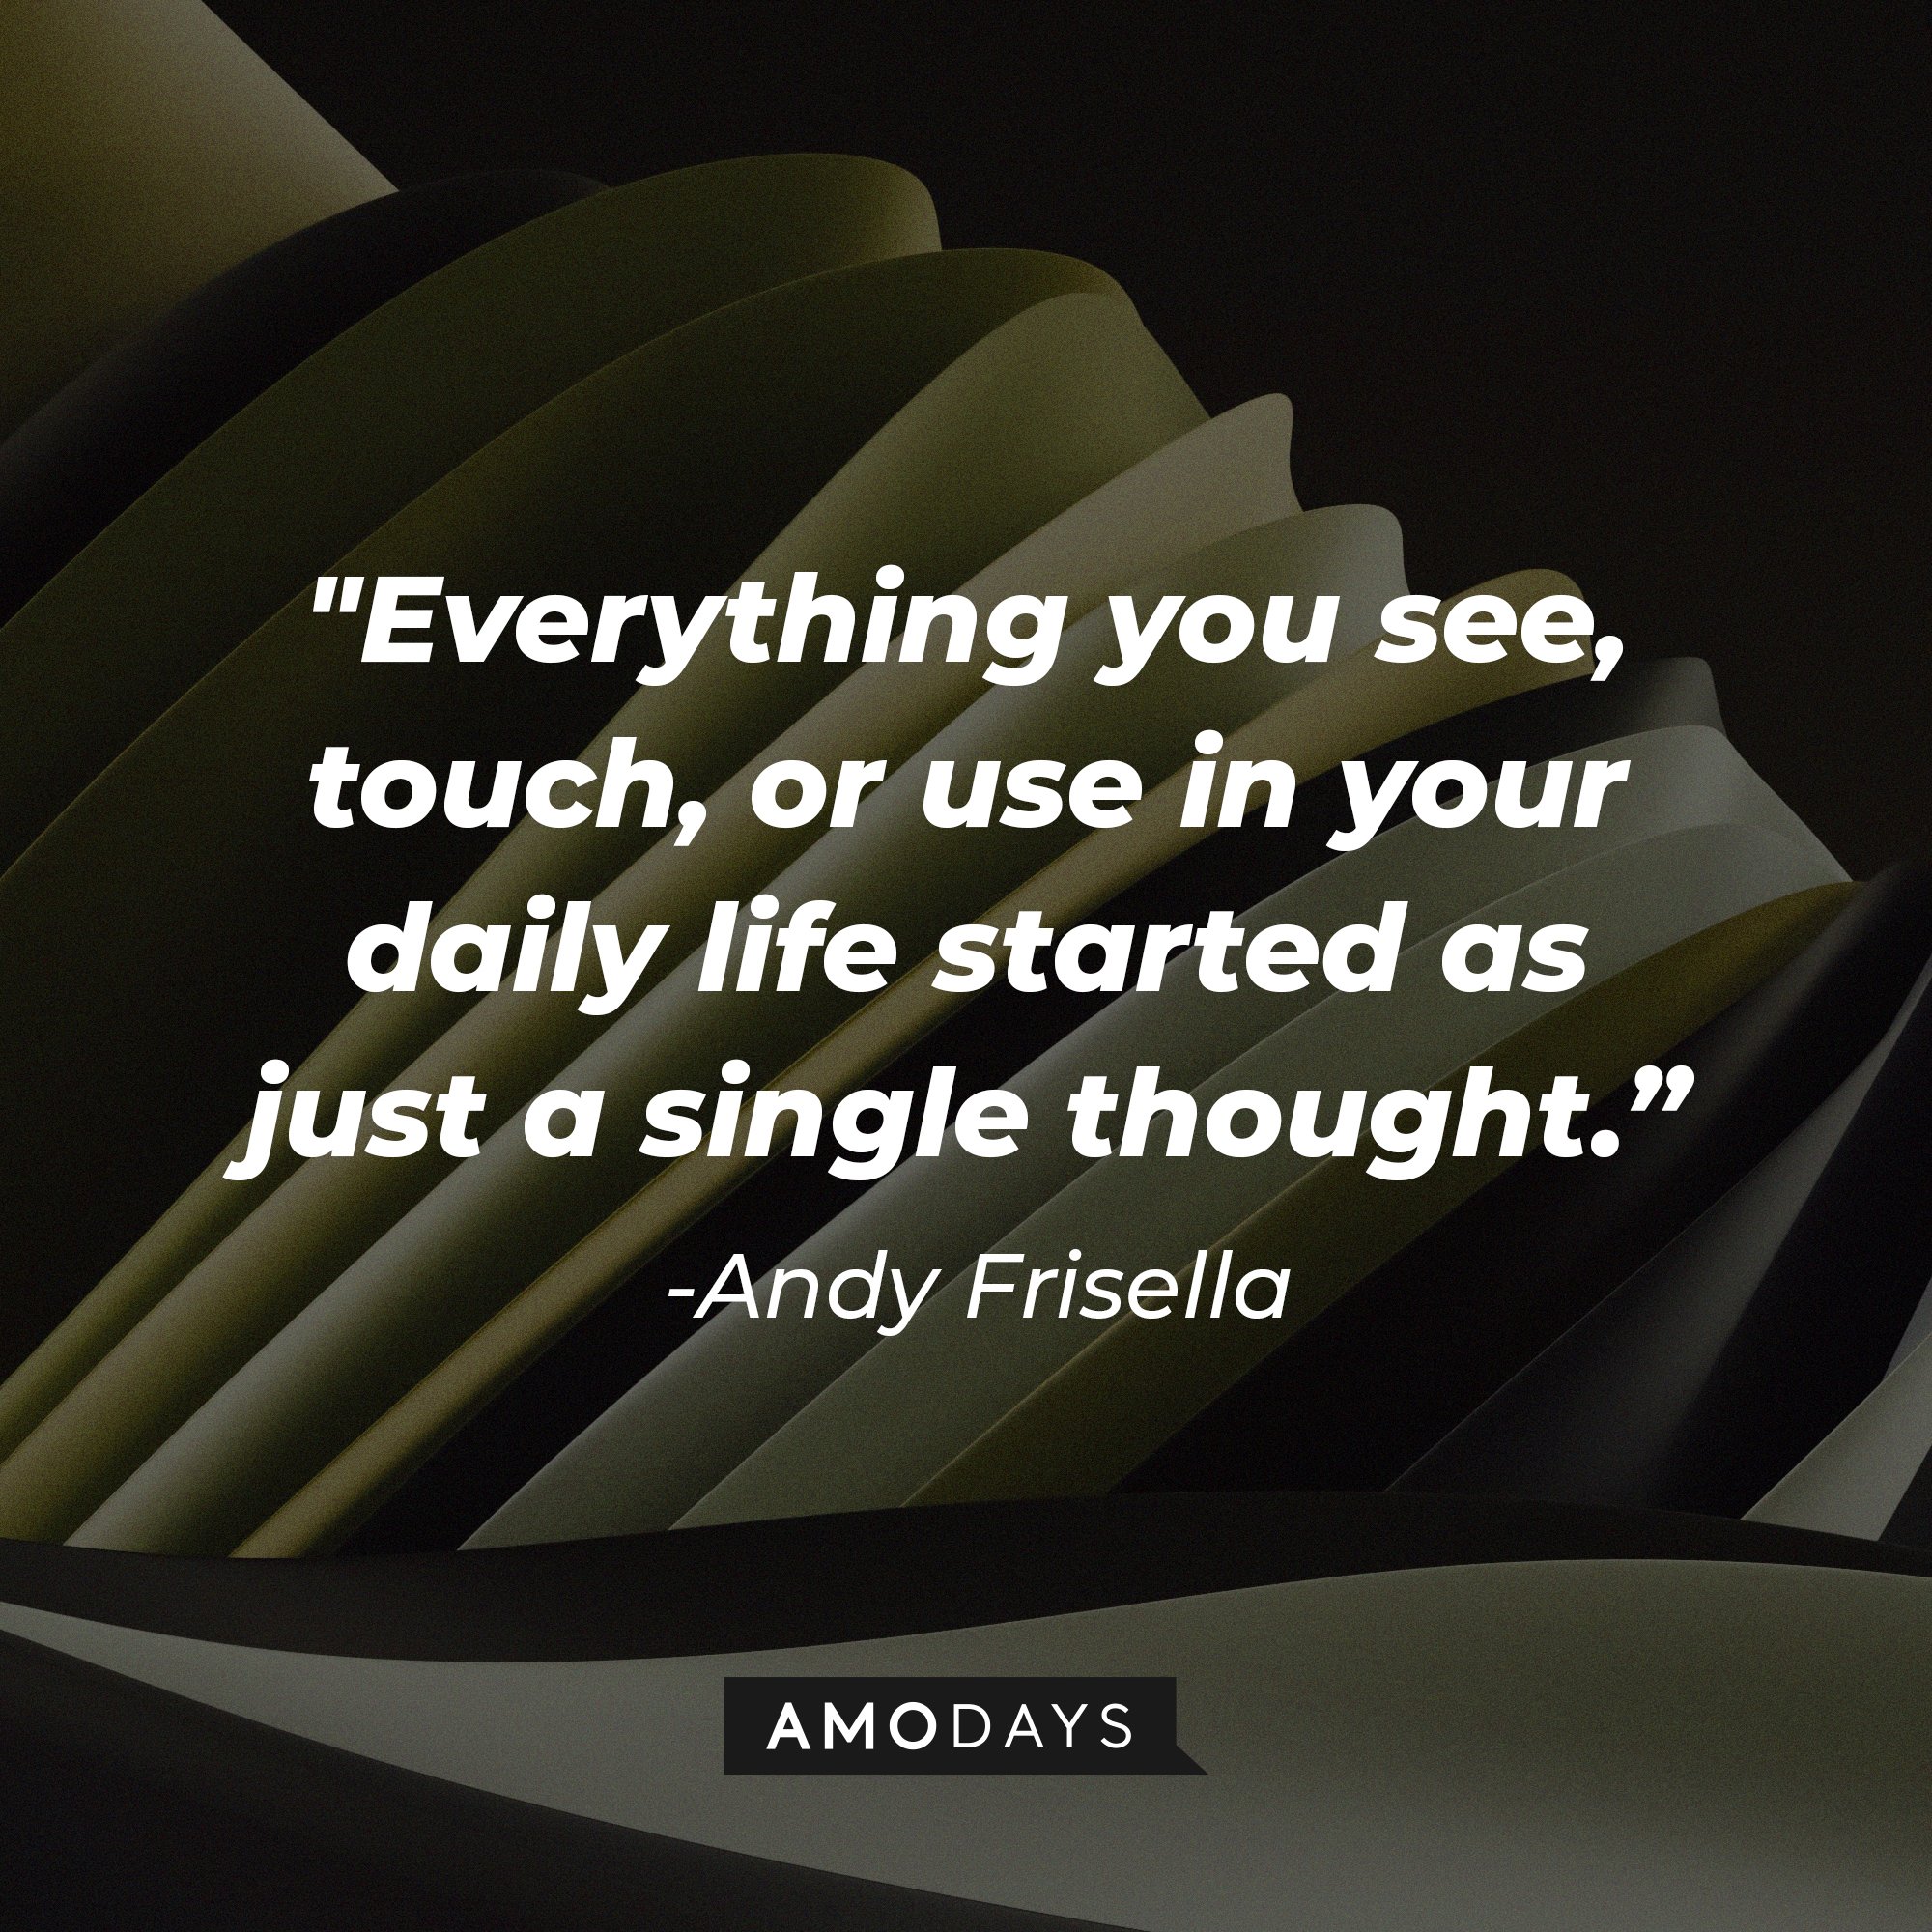 Andy Frisella's quote: "Everything you see, touch, or use in your daily life started as just a single thought." | Image: AmoDays